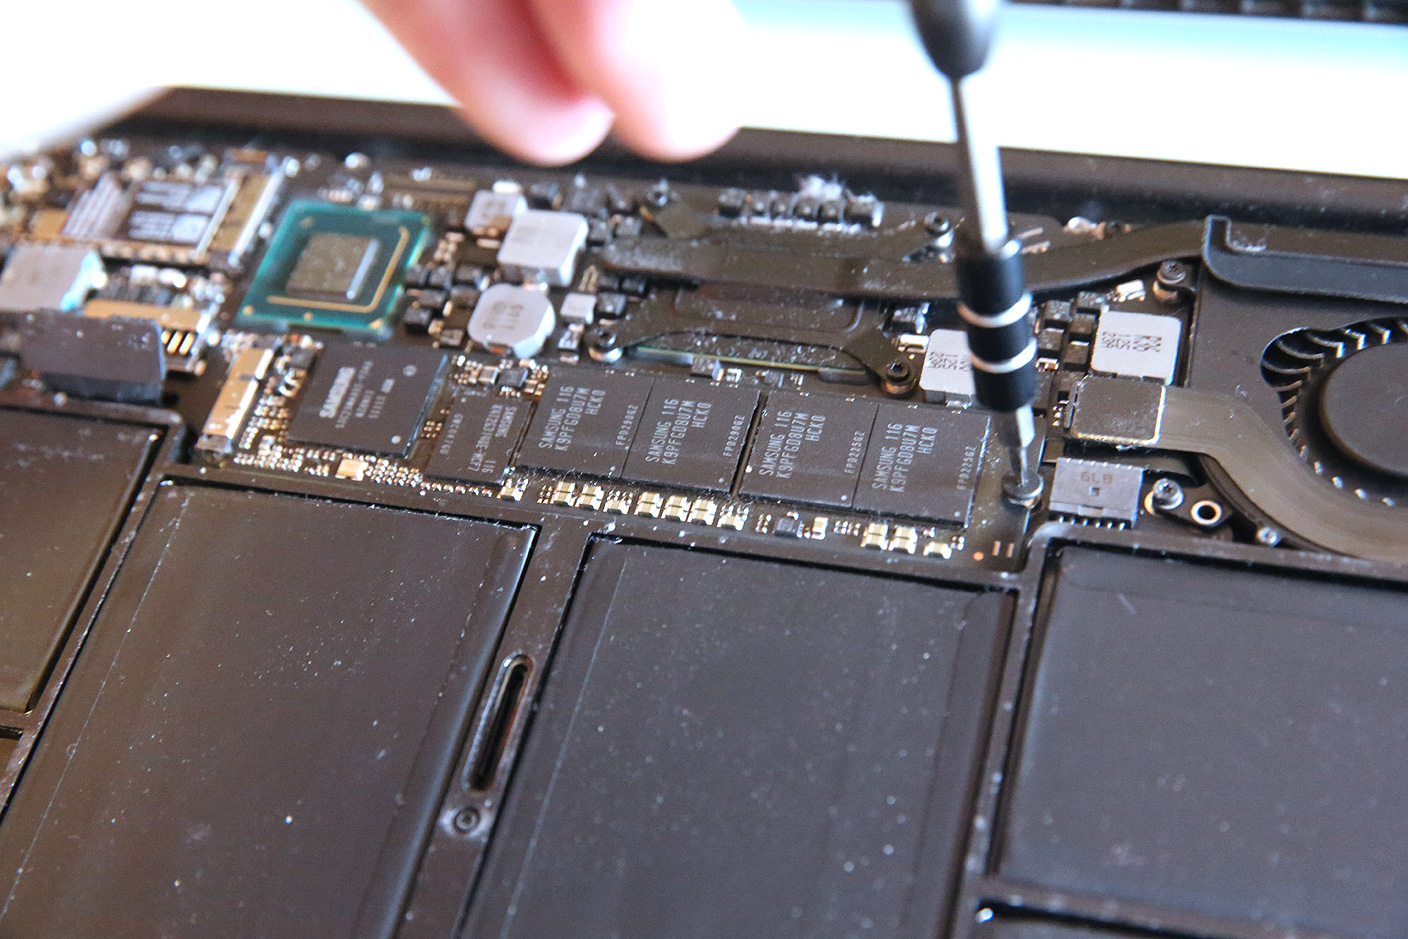 macbook hard drive replacement with ssd